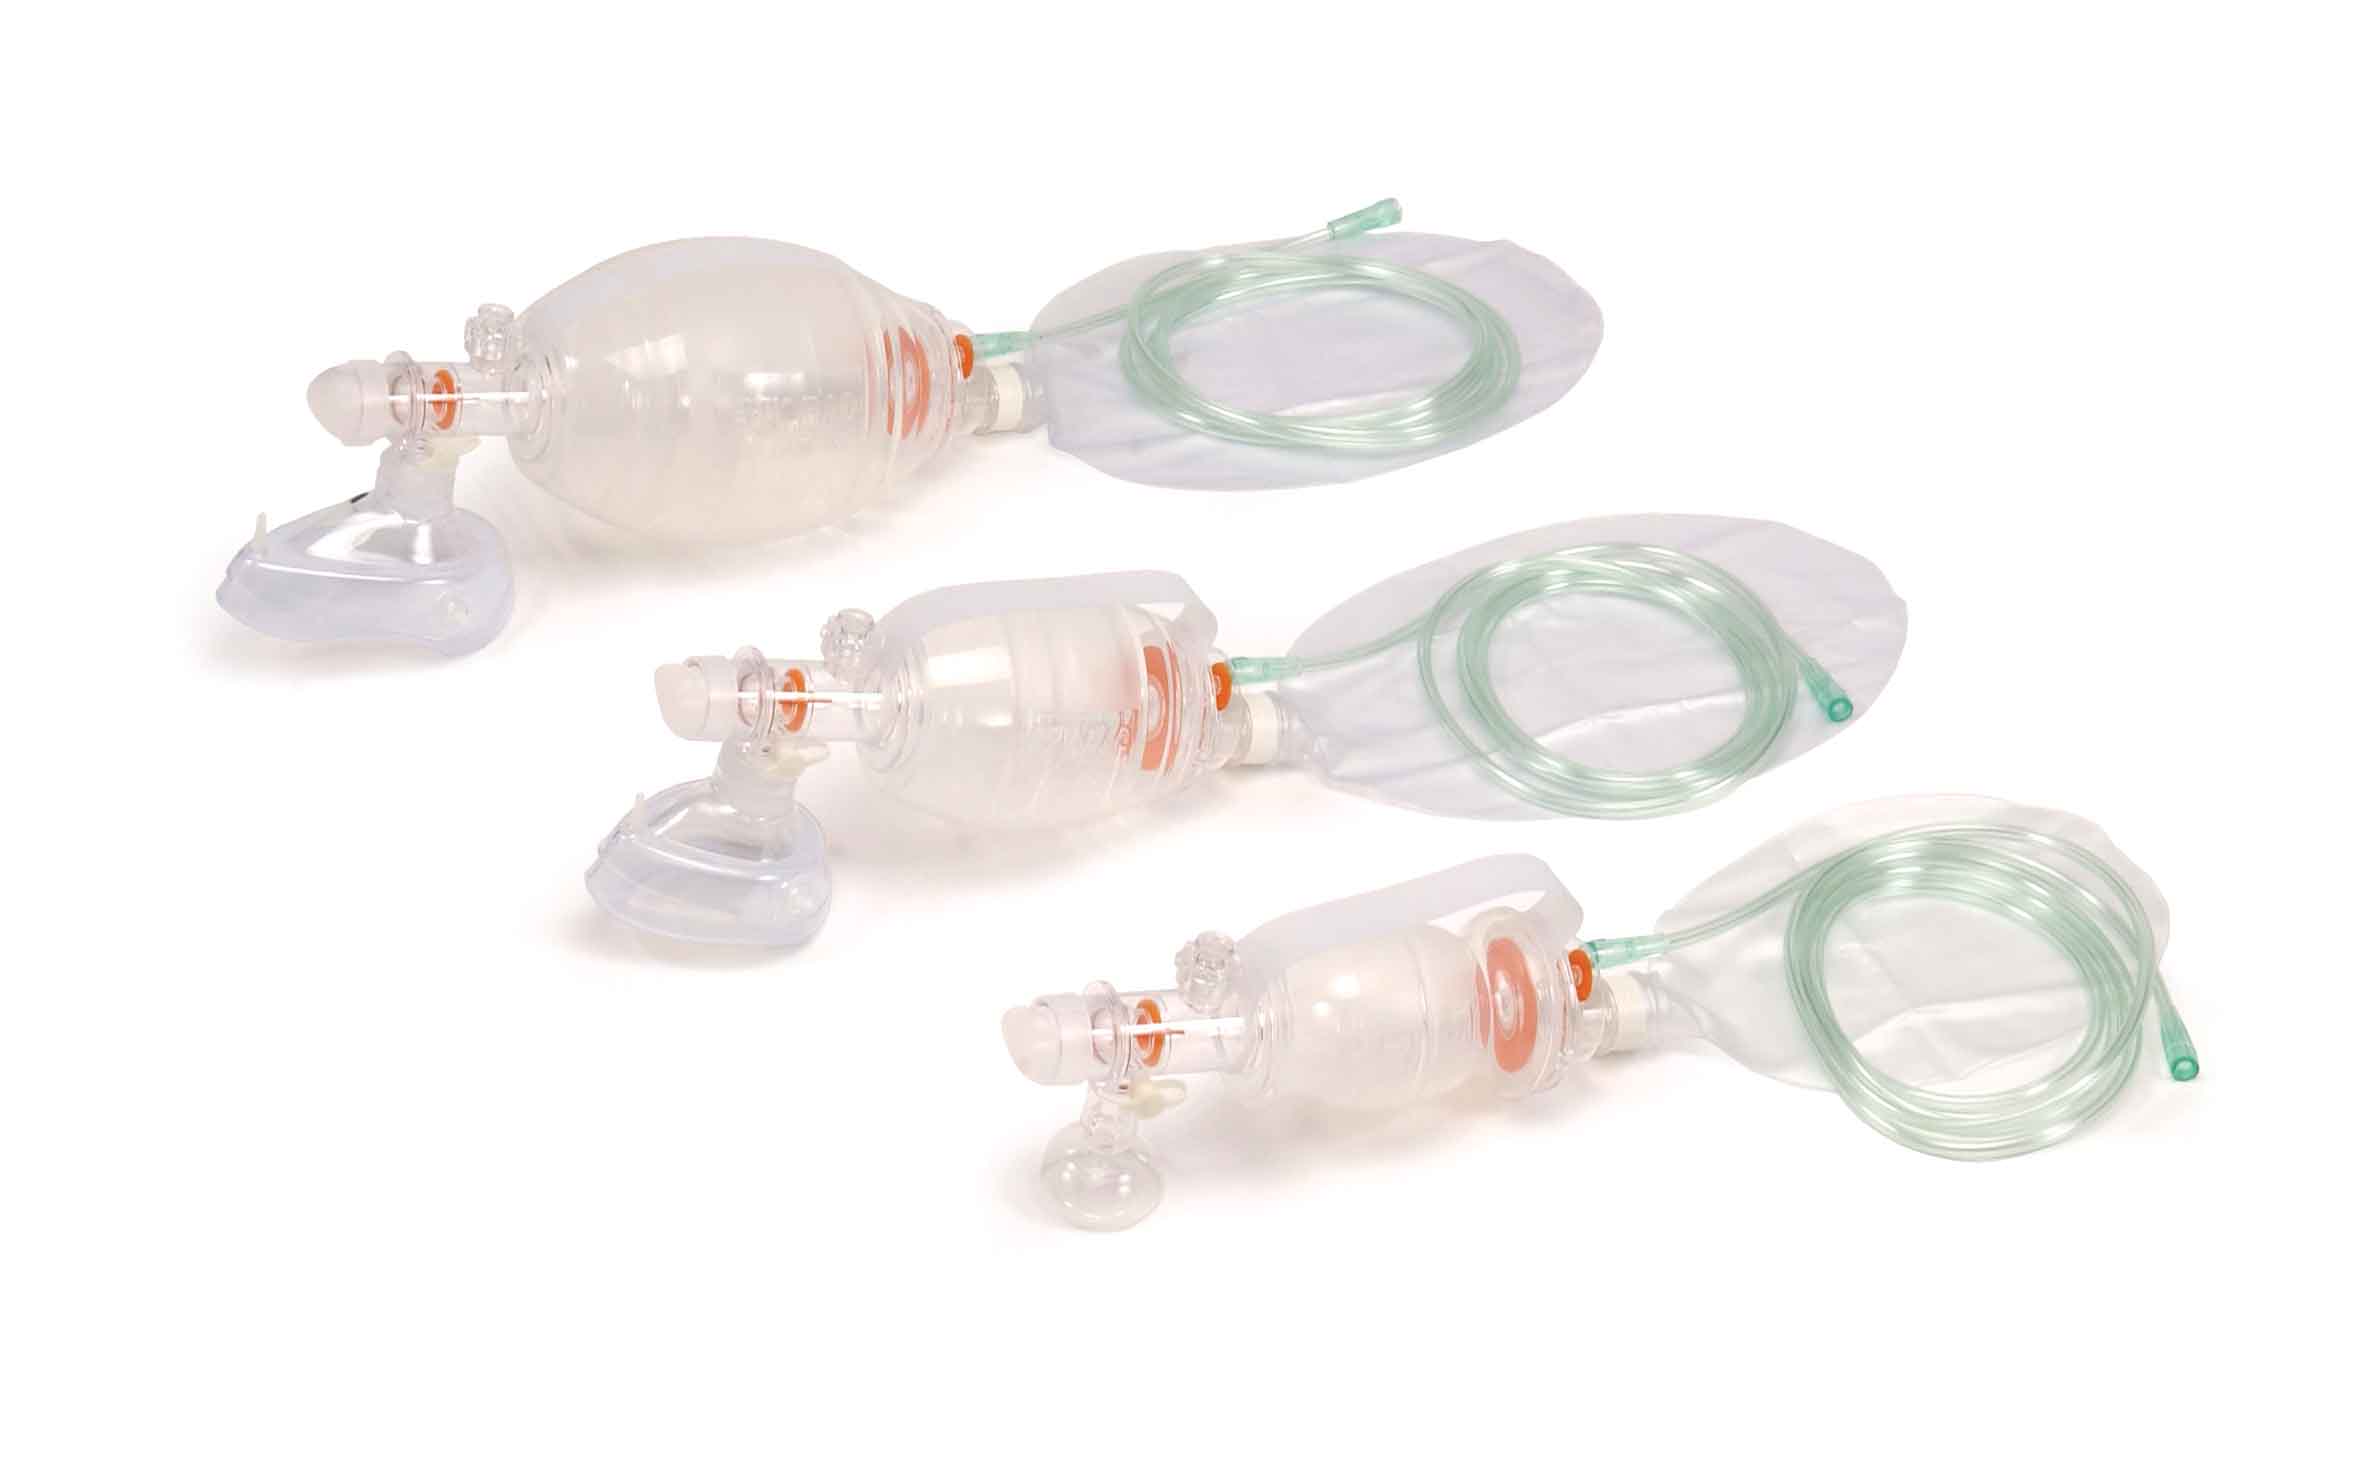 Silicone Reusable BVM with Medication & Monitoring Port